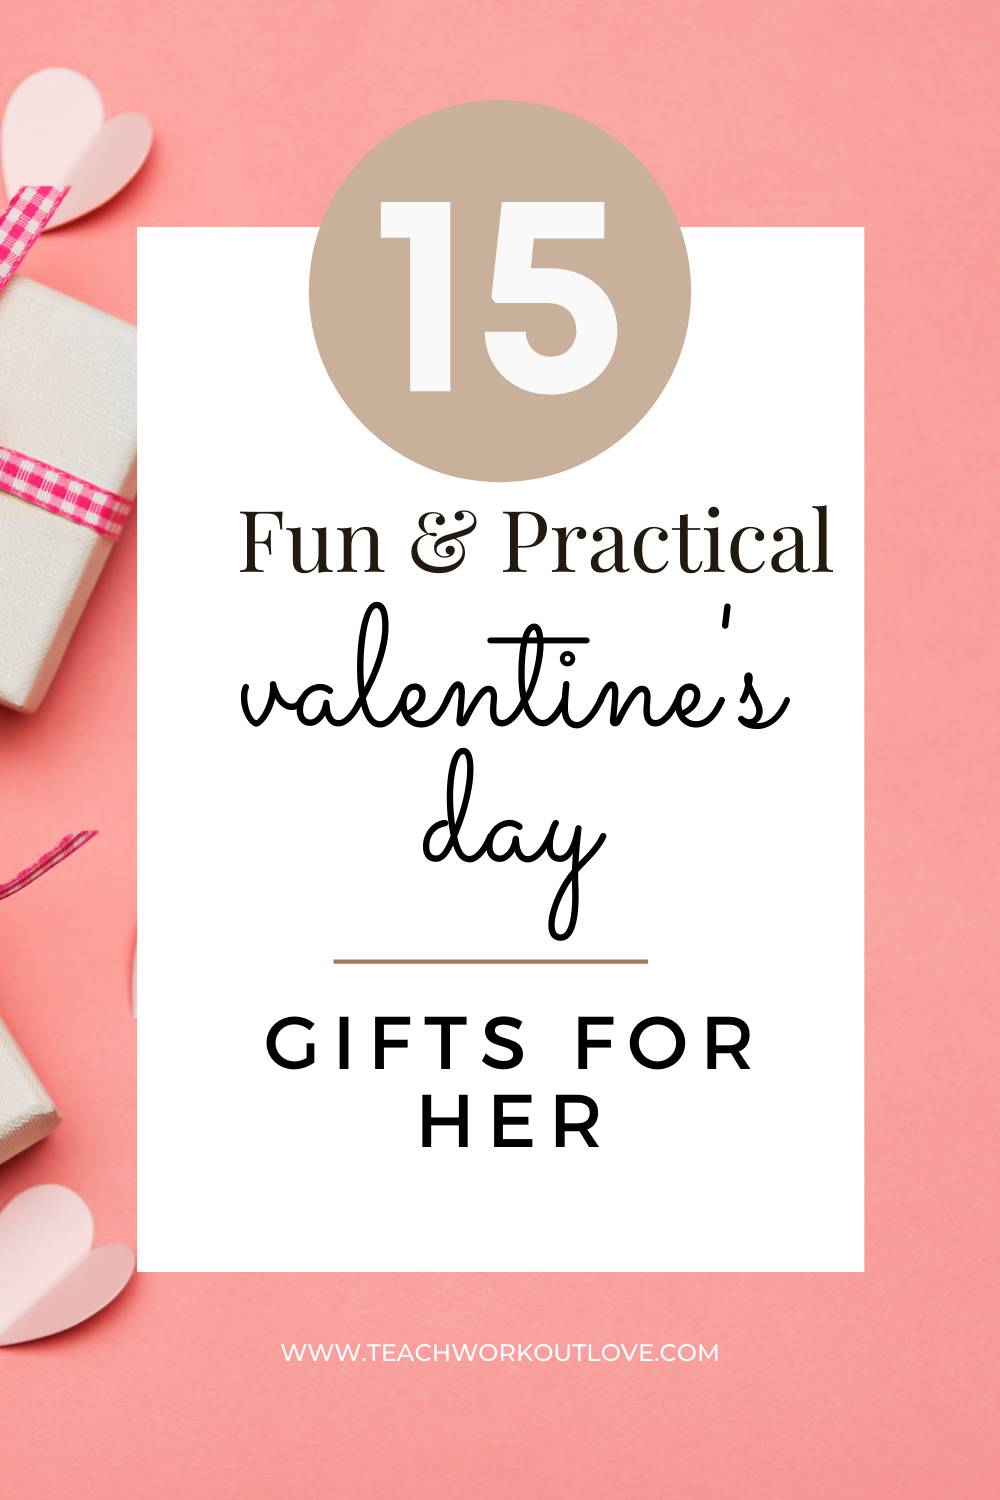 Every year we struggle with what to get women for Valentine's Day. Here are fun and practical Valentine's Day gifts for her that shows you rocked it.